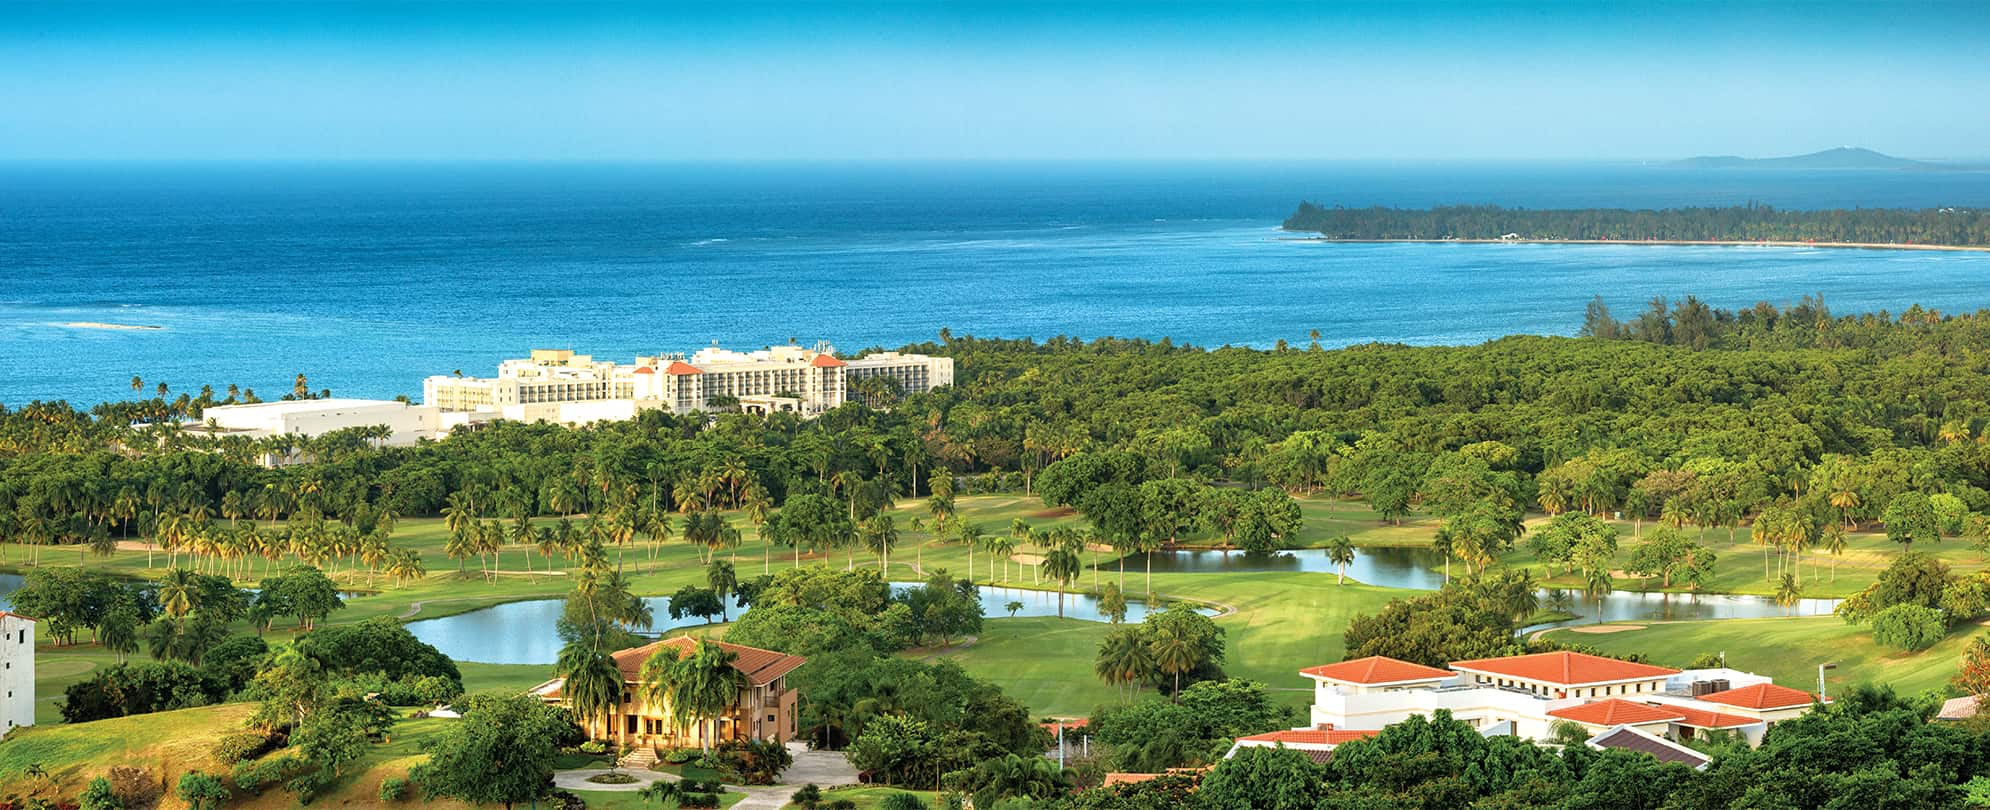 A birds-eye-view of the ocean, resort, and golf course at Margaritaville Vacation Club by Wyndham - Rio Mar in Puerto Rico.